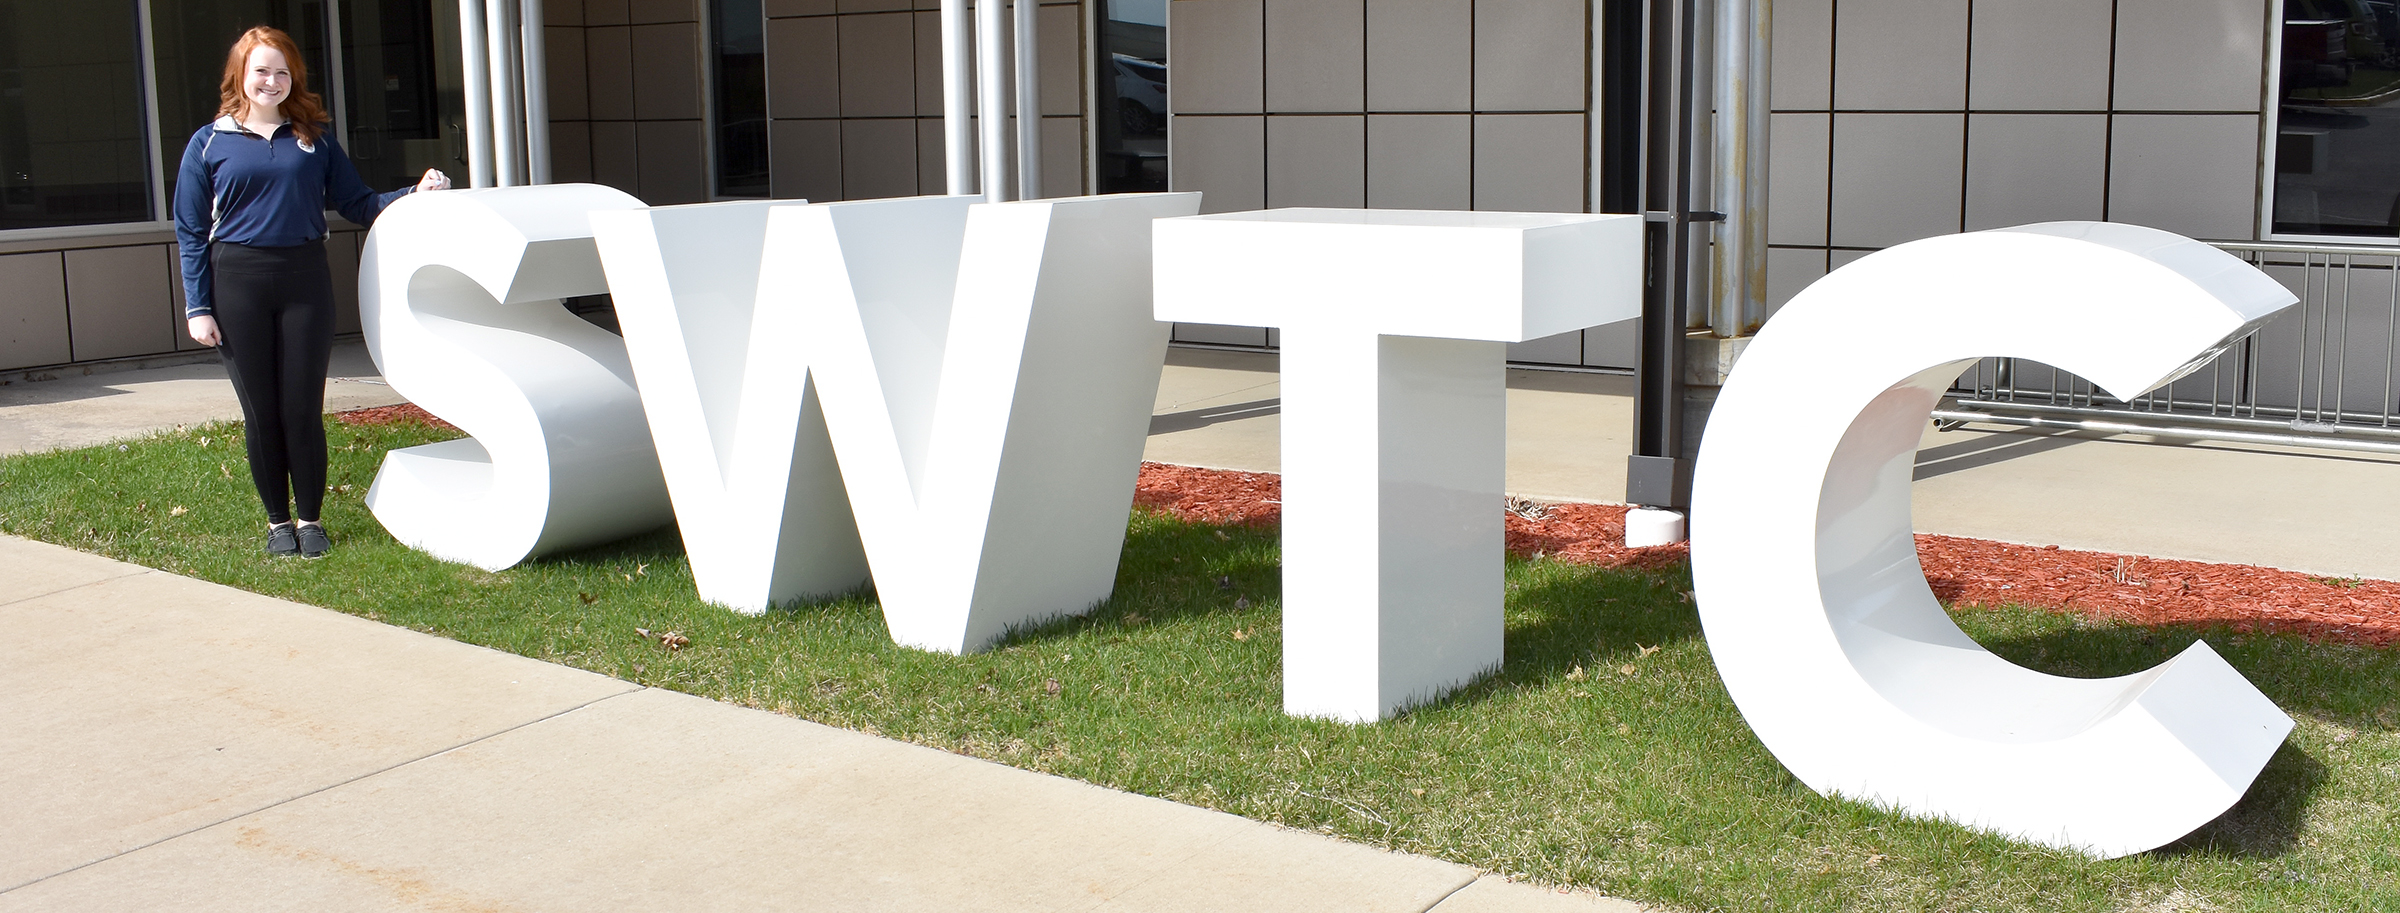 Female student standing next to large S-W-T-C letters